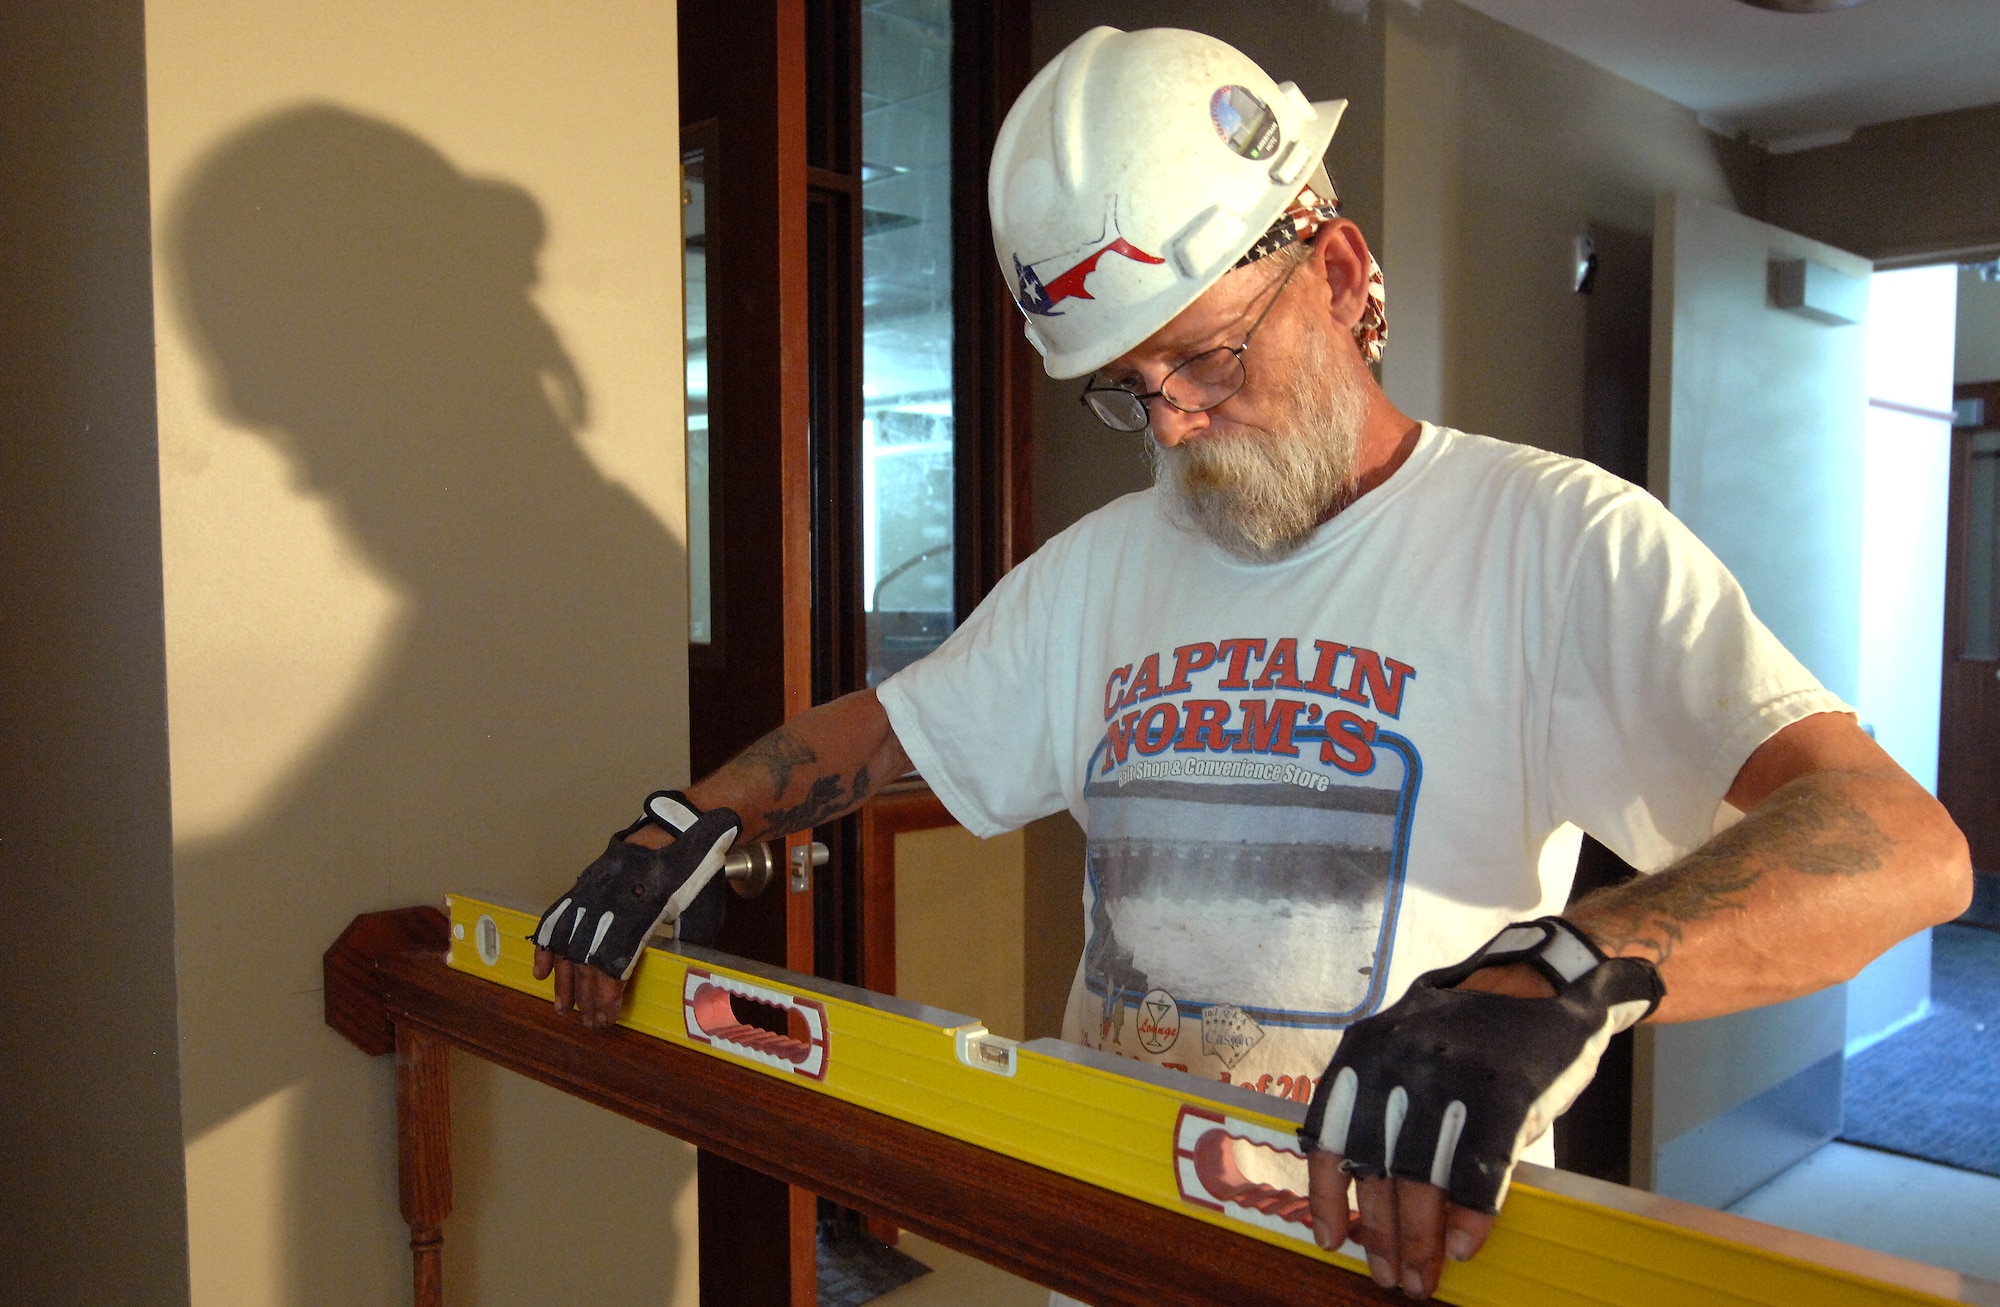 Jim Beggs, a contracted carpenter from South Sioux City, Iowa, levels a hand rail while completing finish work inside Building 49. The building, which was built in 1894, is receiving $5 million in renovations that are scheduled for completion later this summer. The updates will provide 32,000 square feet of office space for the 55th Mission Support Group and 55th Force Support Squadron. (U.S. Air Force photo/Delanie Stafford)